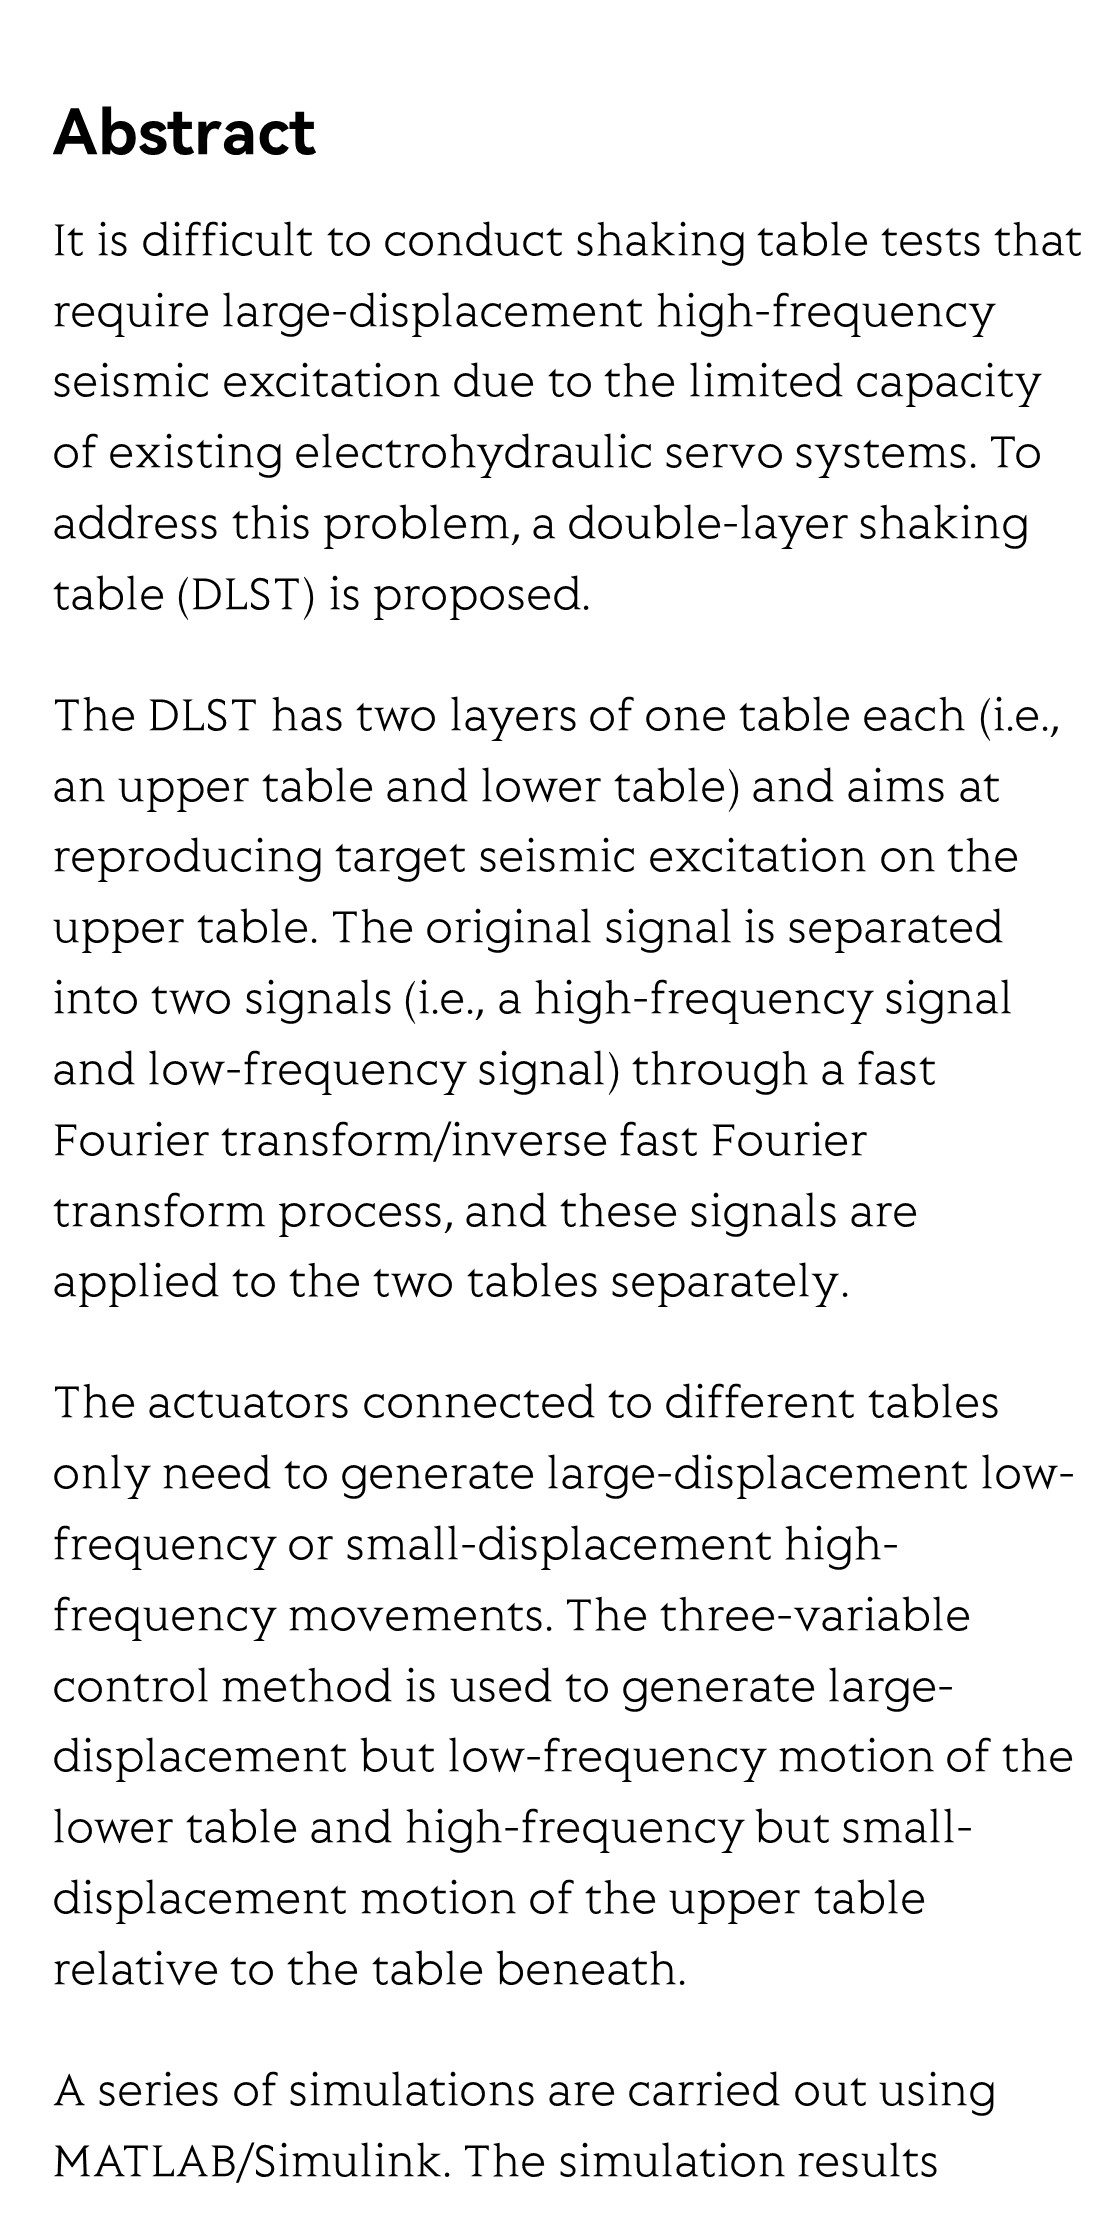 Development of a double-layer shaking table for large-displacement high-frequency excitation_2